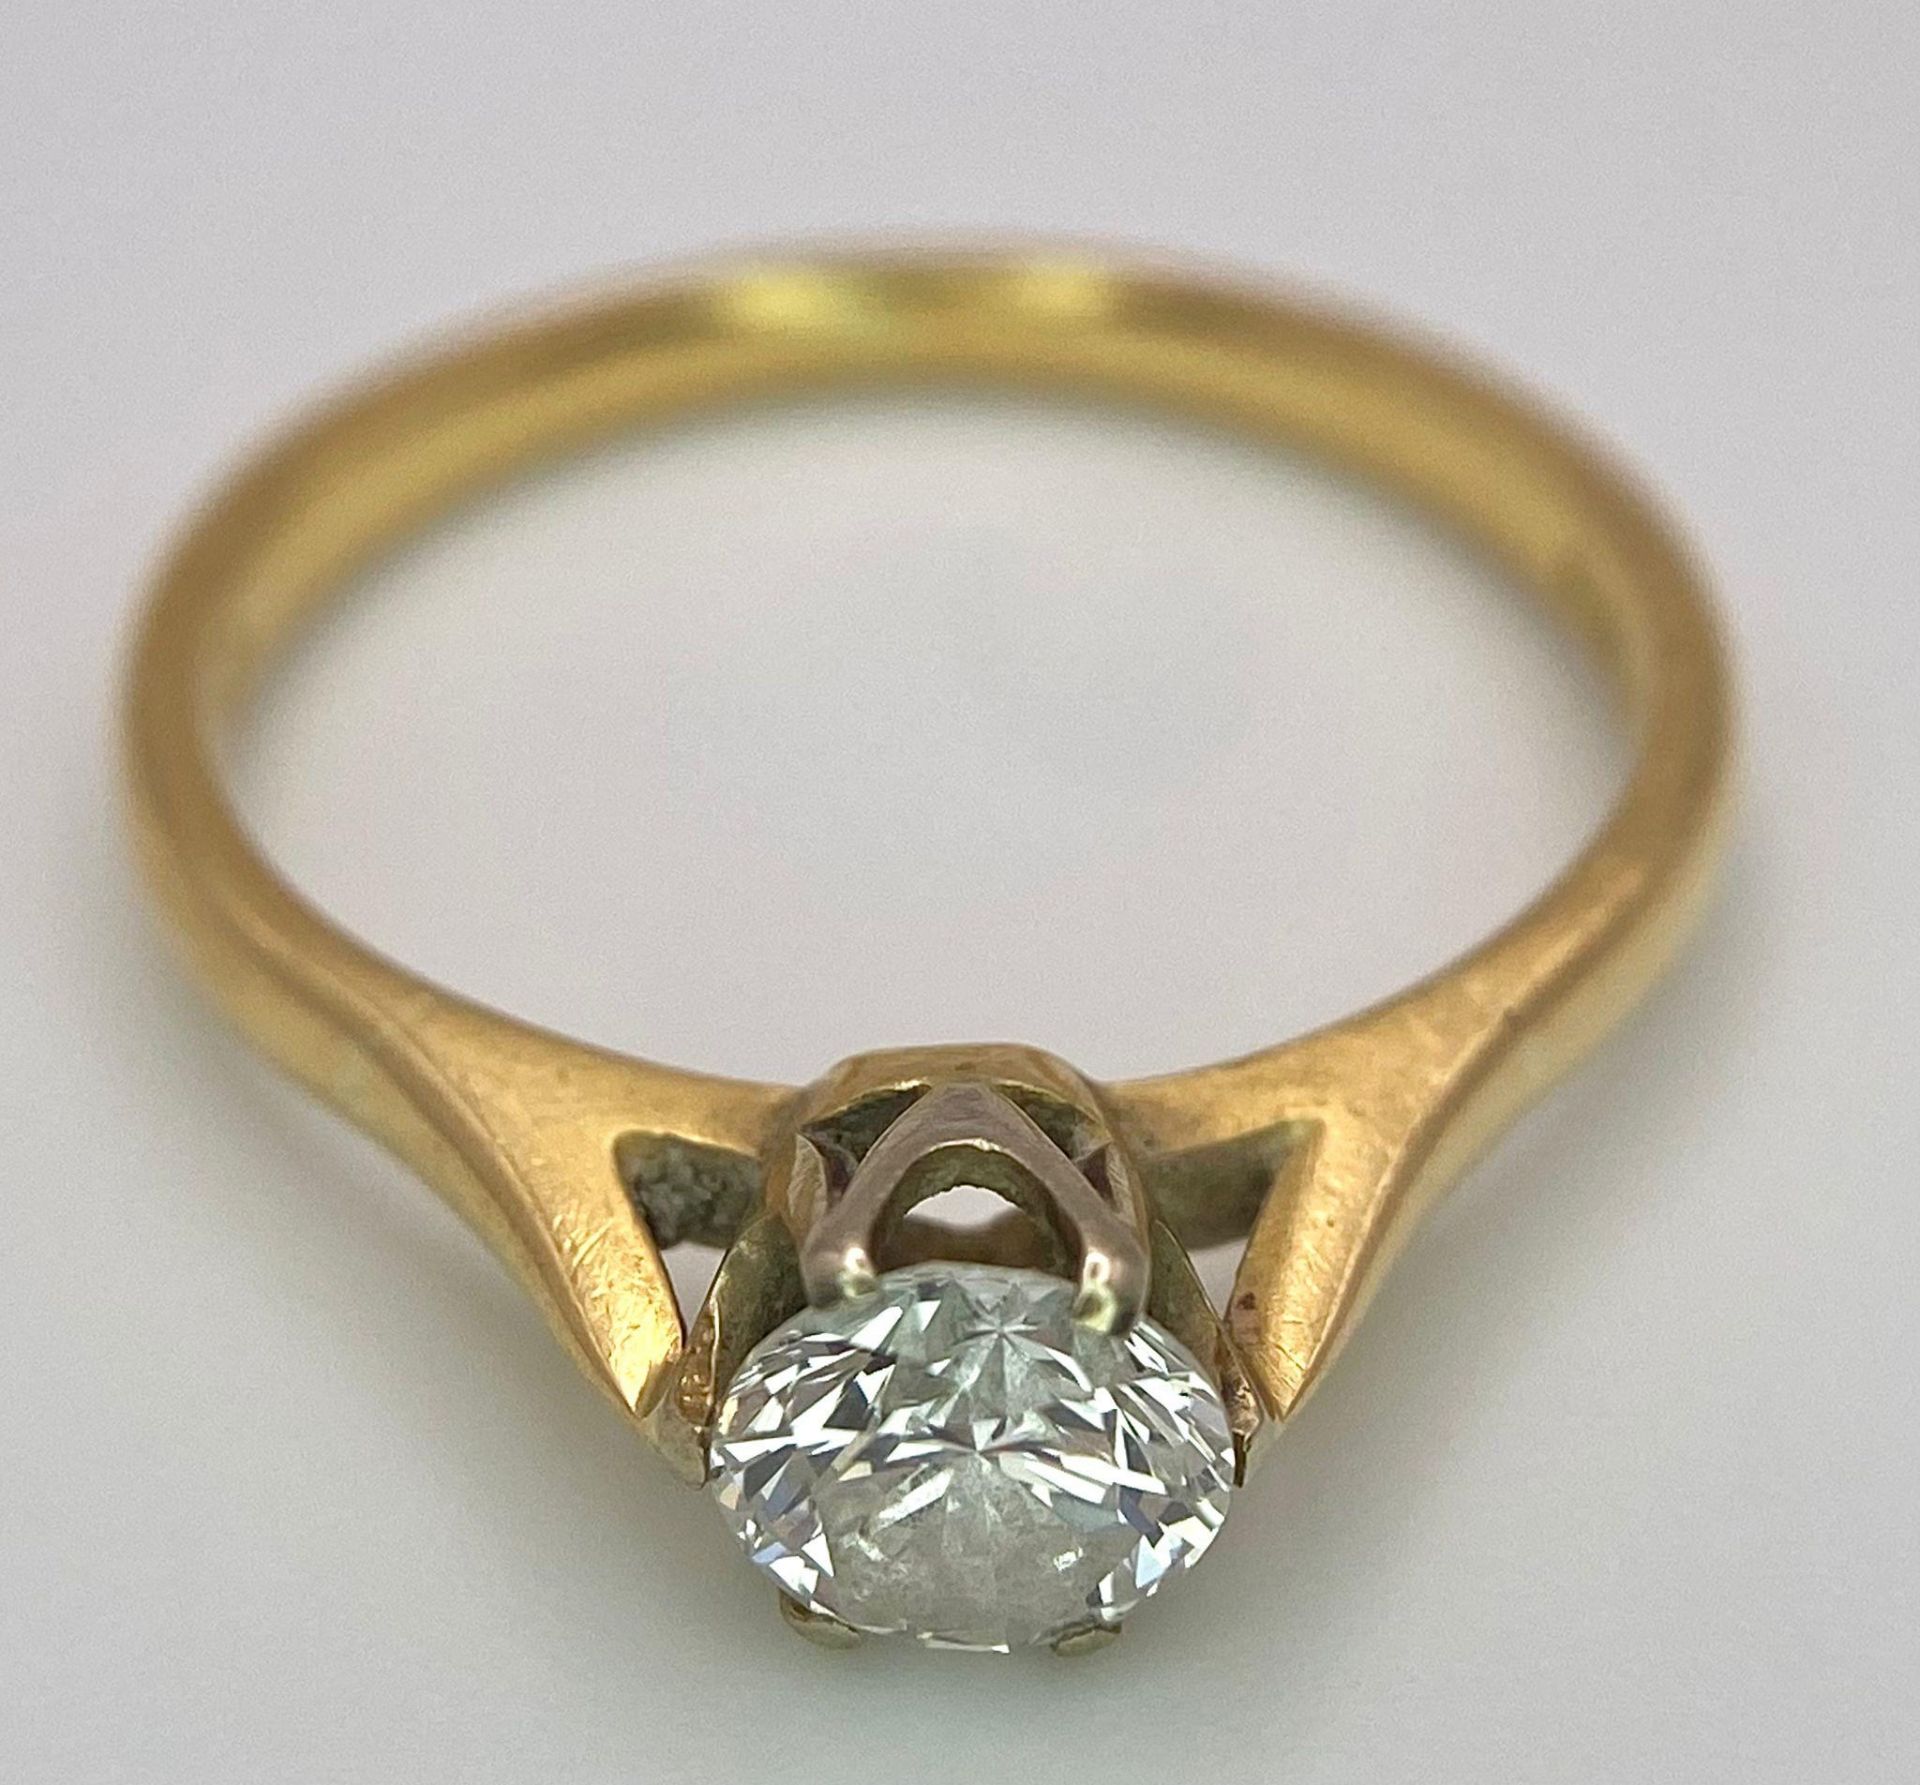 An 18K Yellow Gold Diamond Solitaire Ring. 0.75ct brilliant round cut diamond. Size N. 2.65g total - Image 4 of 6